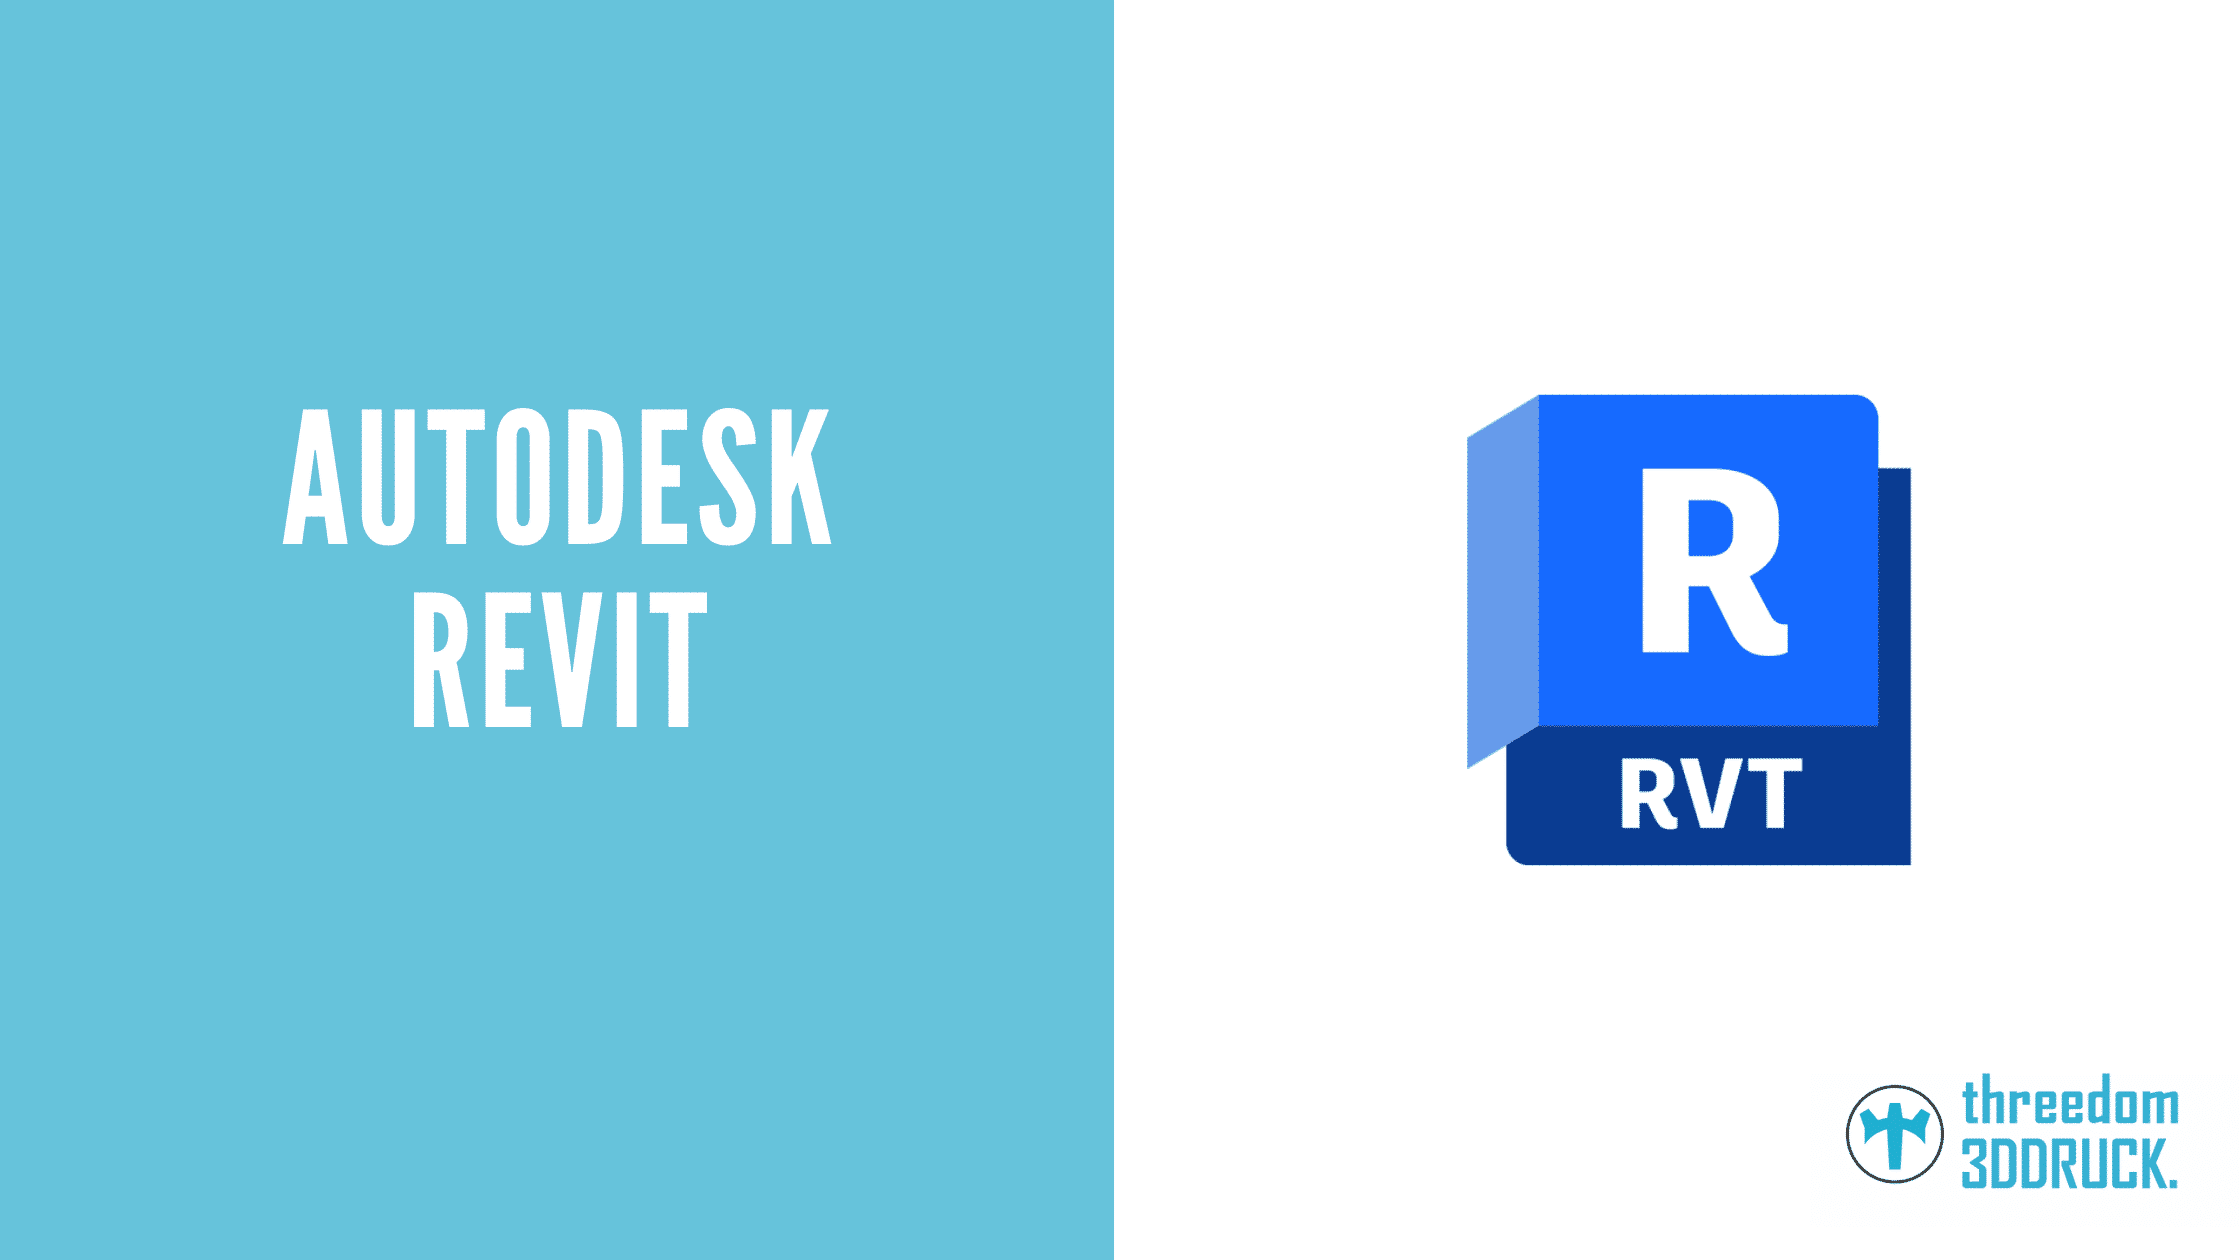 Revit: definition, functionality and scope